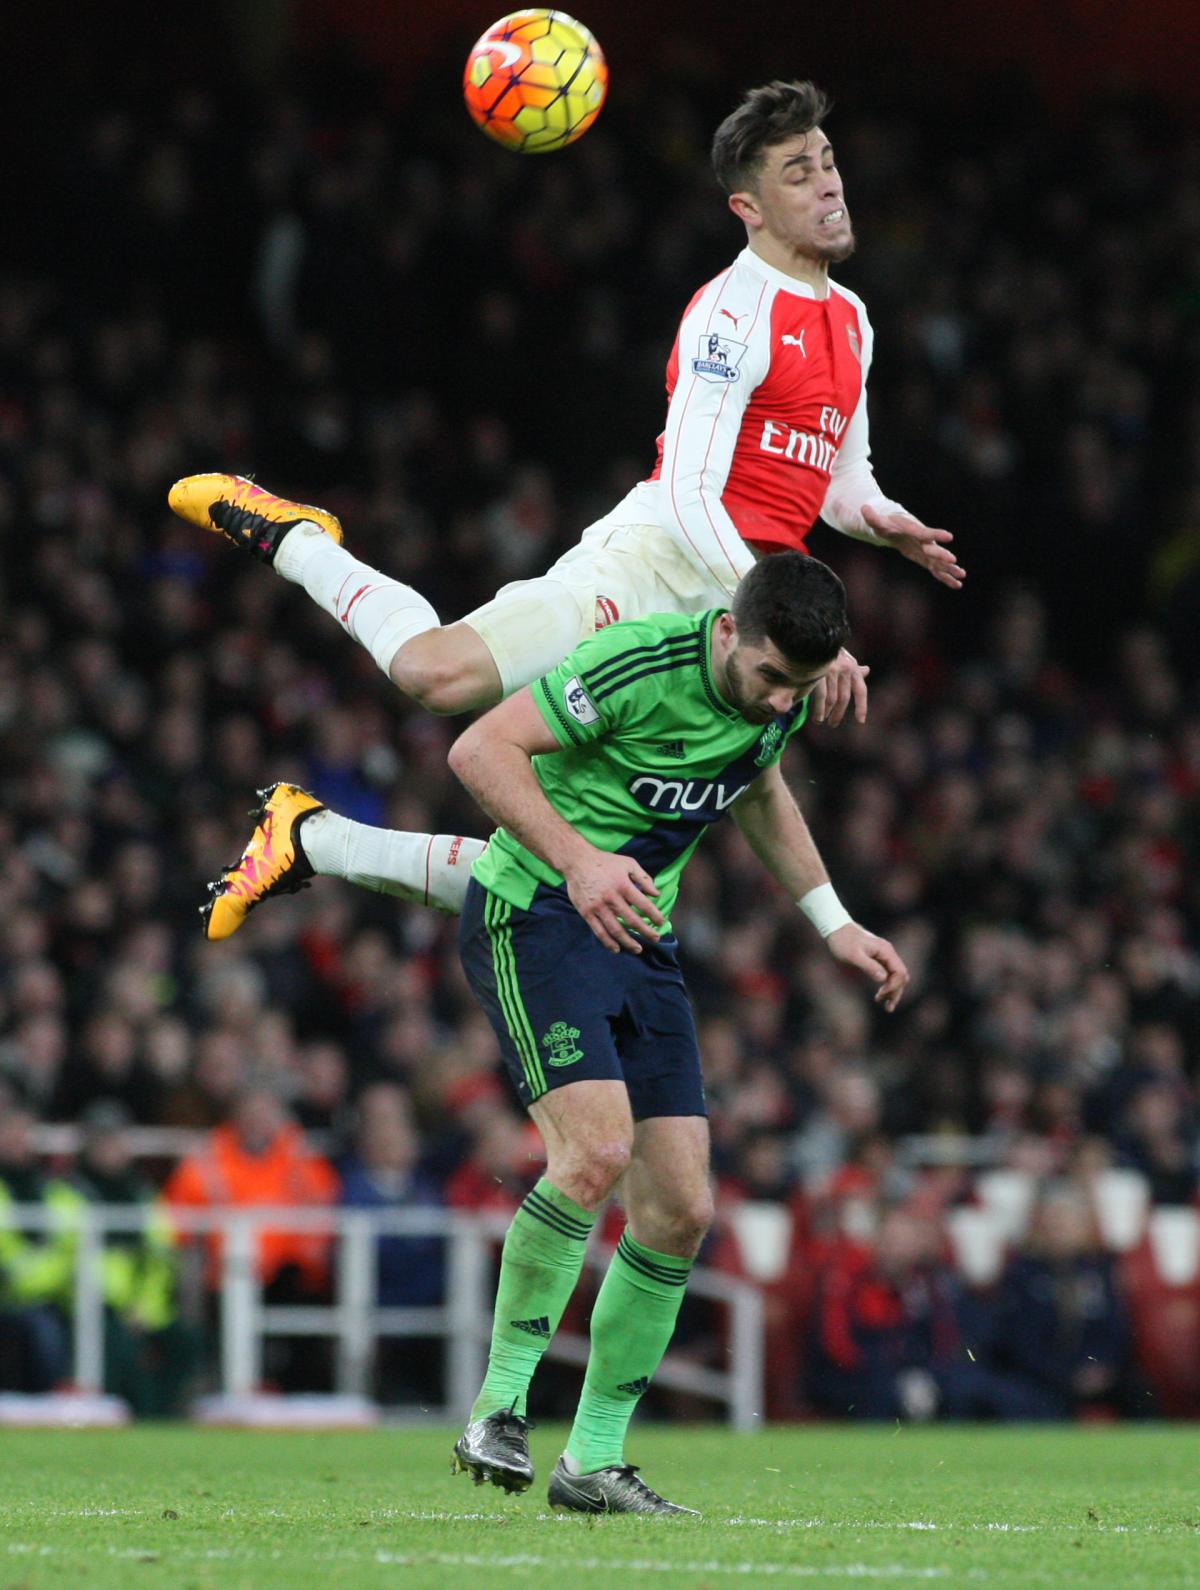 The Barclays Premier League clash between Arsenal and Southampton at the Emirates Stadium. The unauthorised downloading, editing, copying or distribution of this image is strictly prohibited.